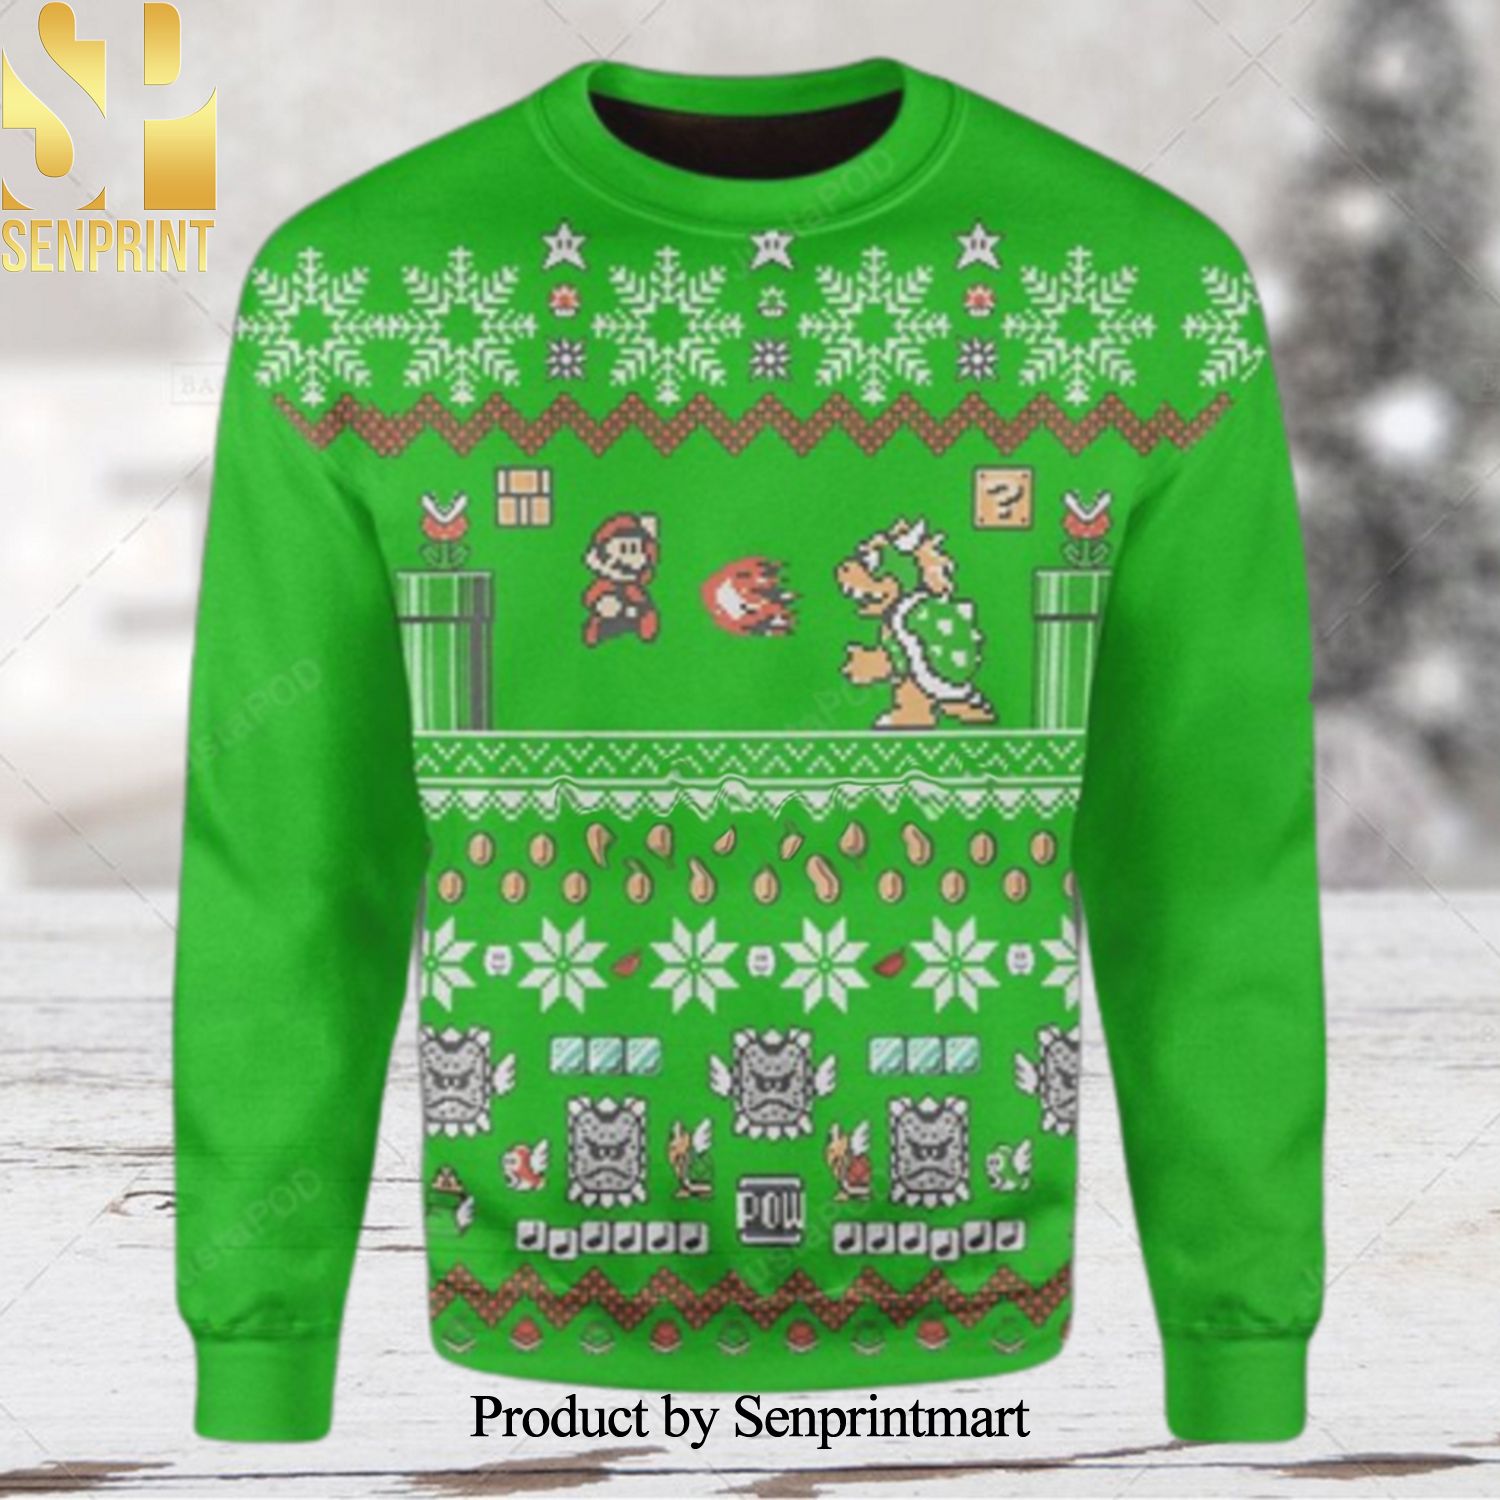 Super Mario Nintendo Ugly Christmas Wool Knitted Sweater